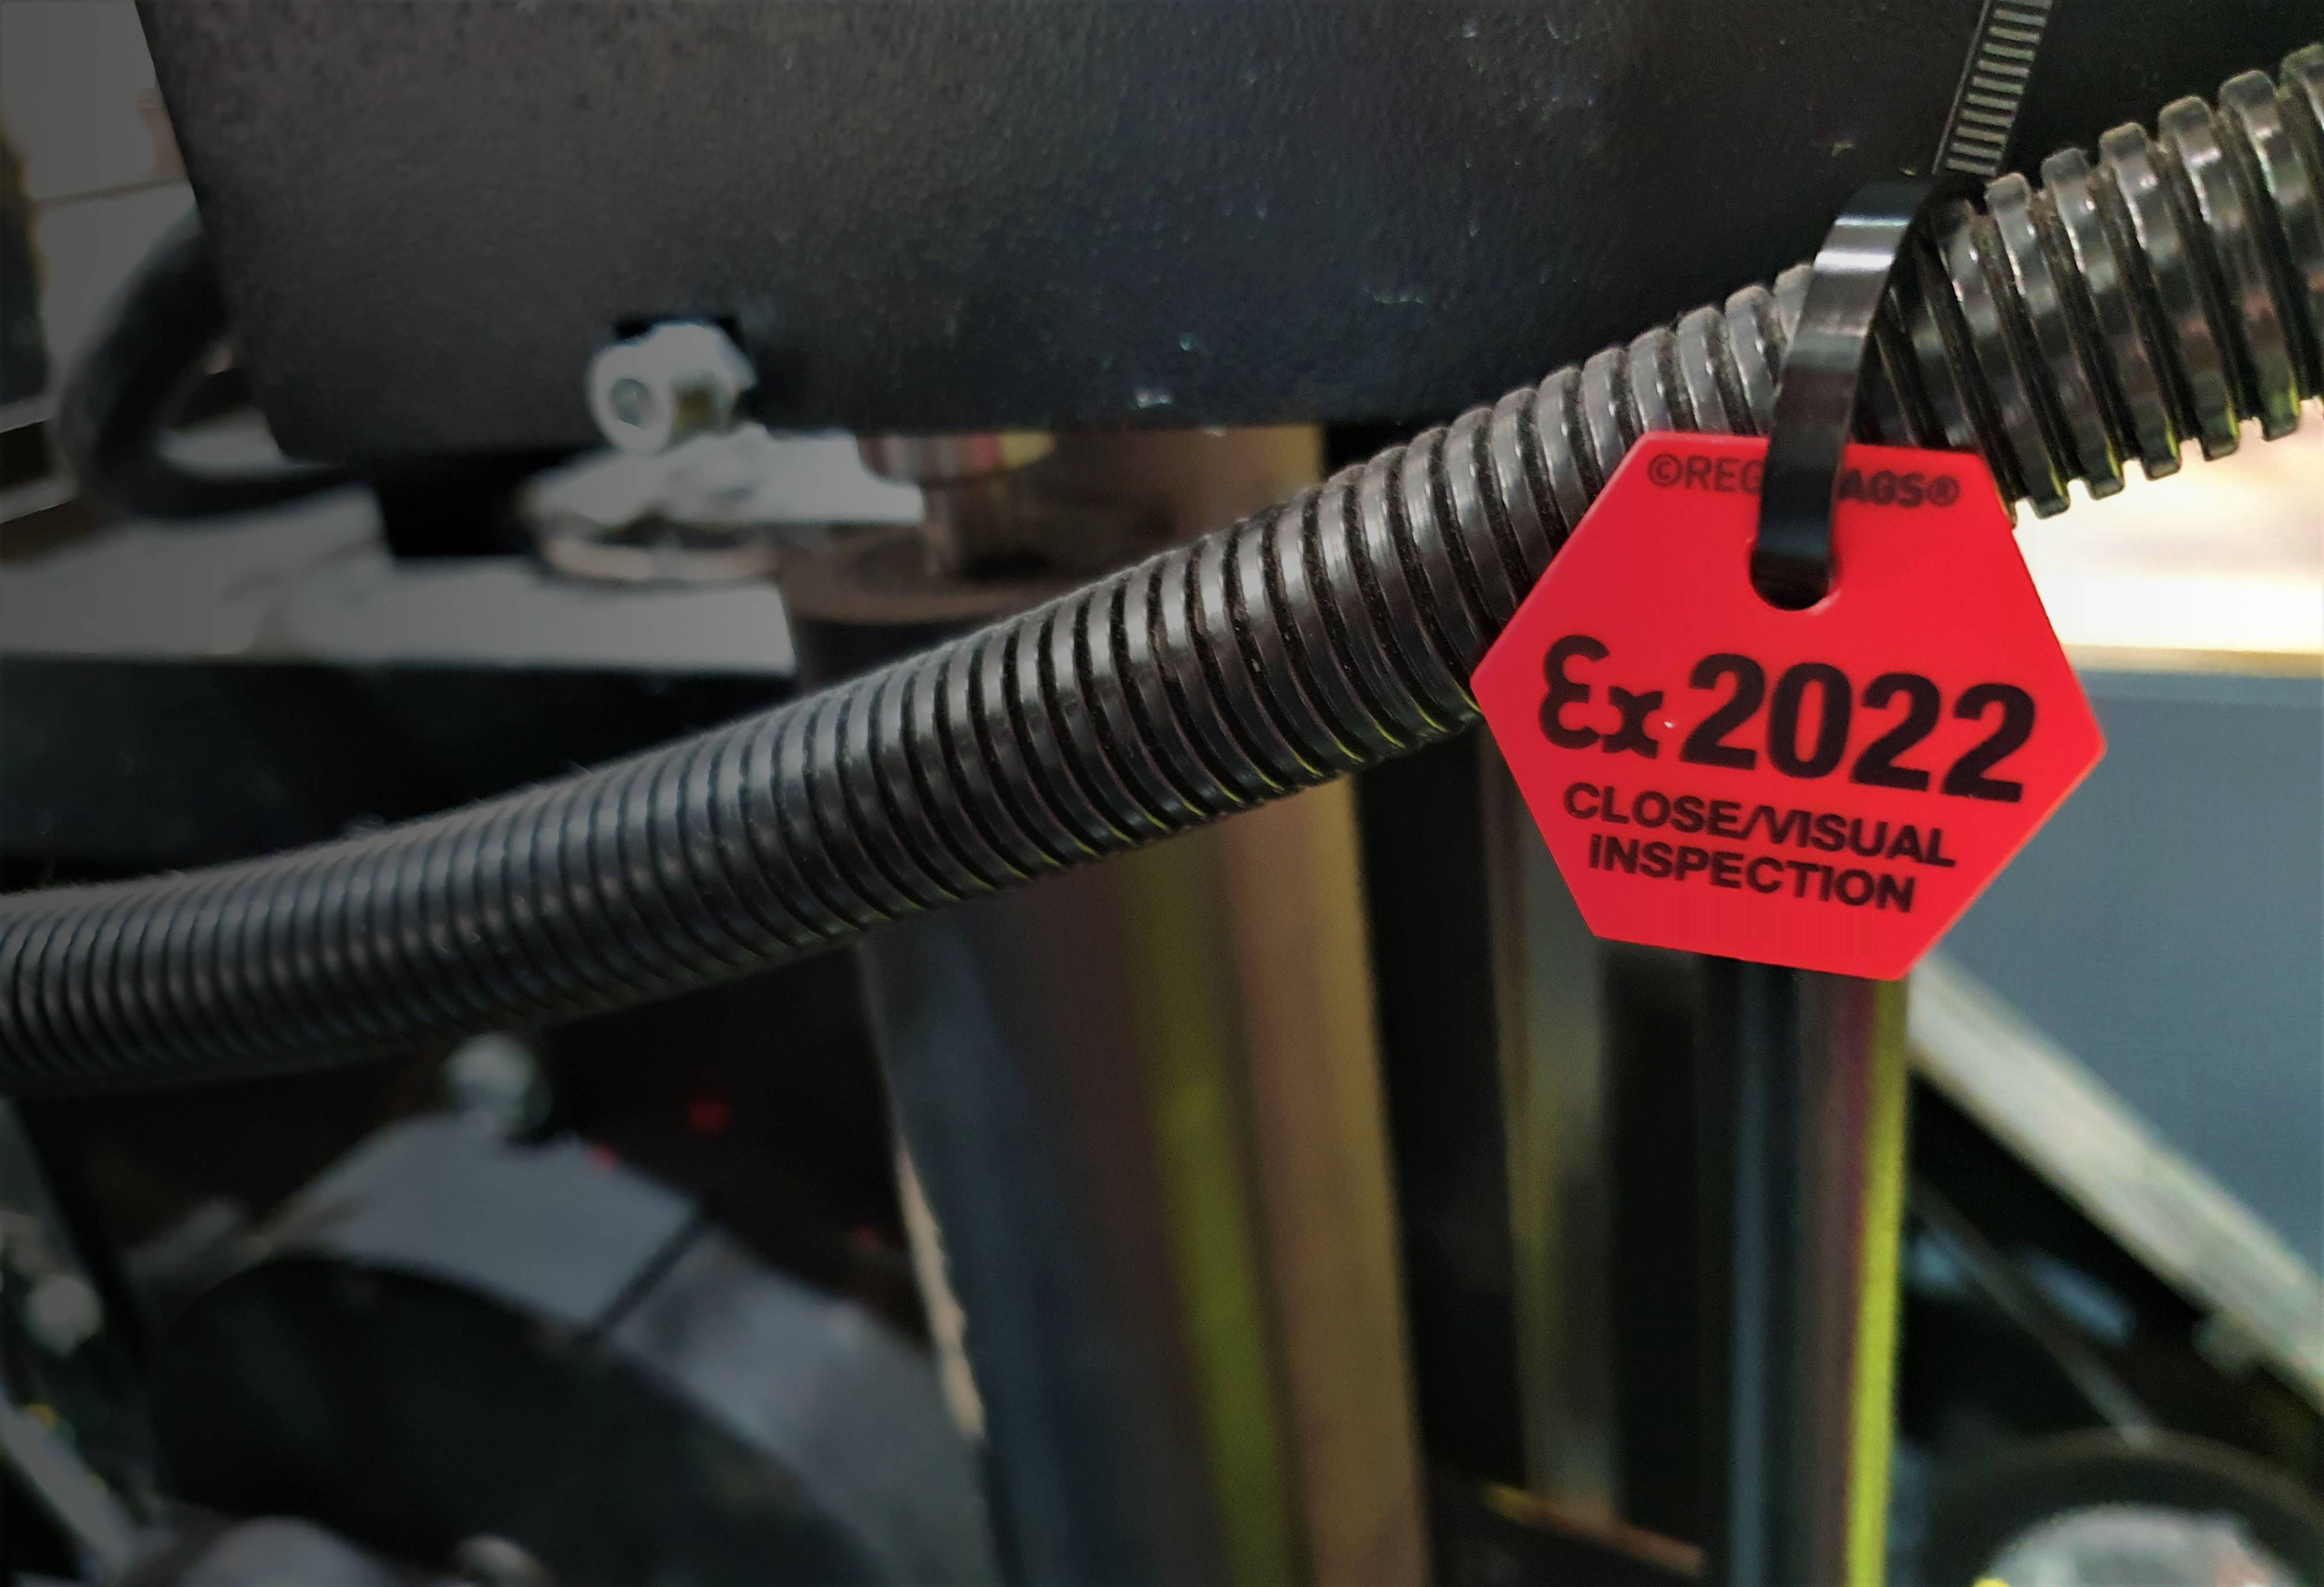 ATEX or Ex Inspection Tagging: why is it needed?